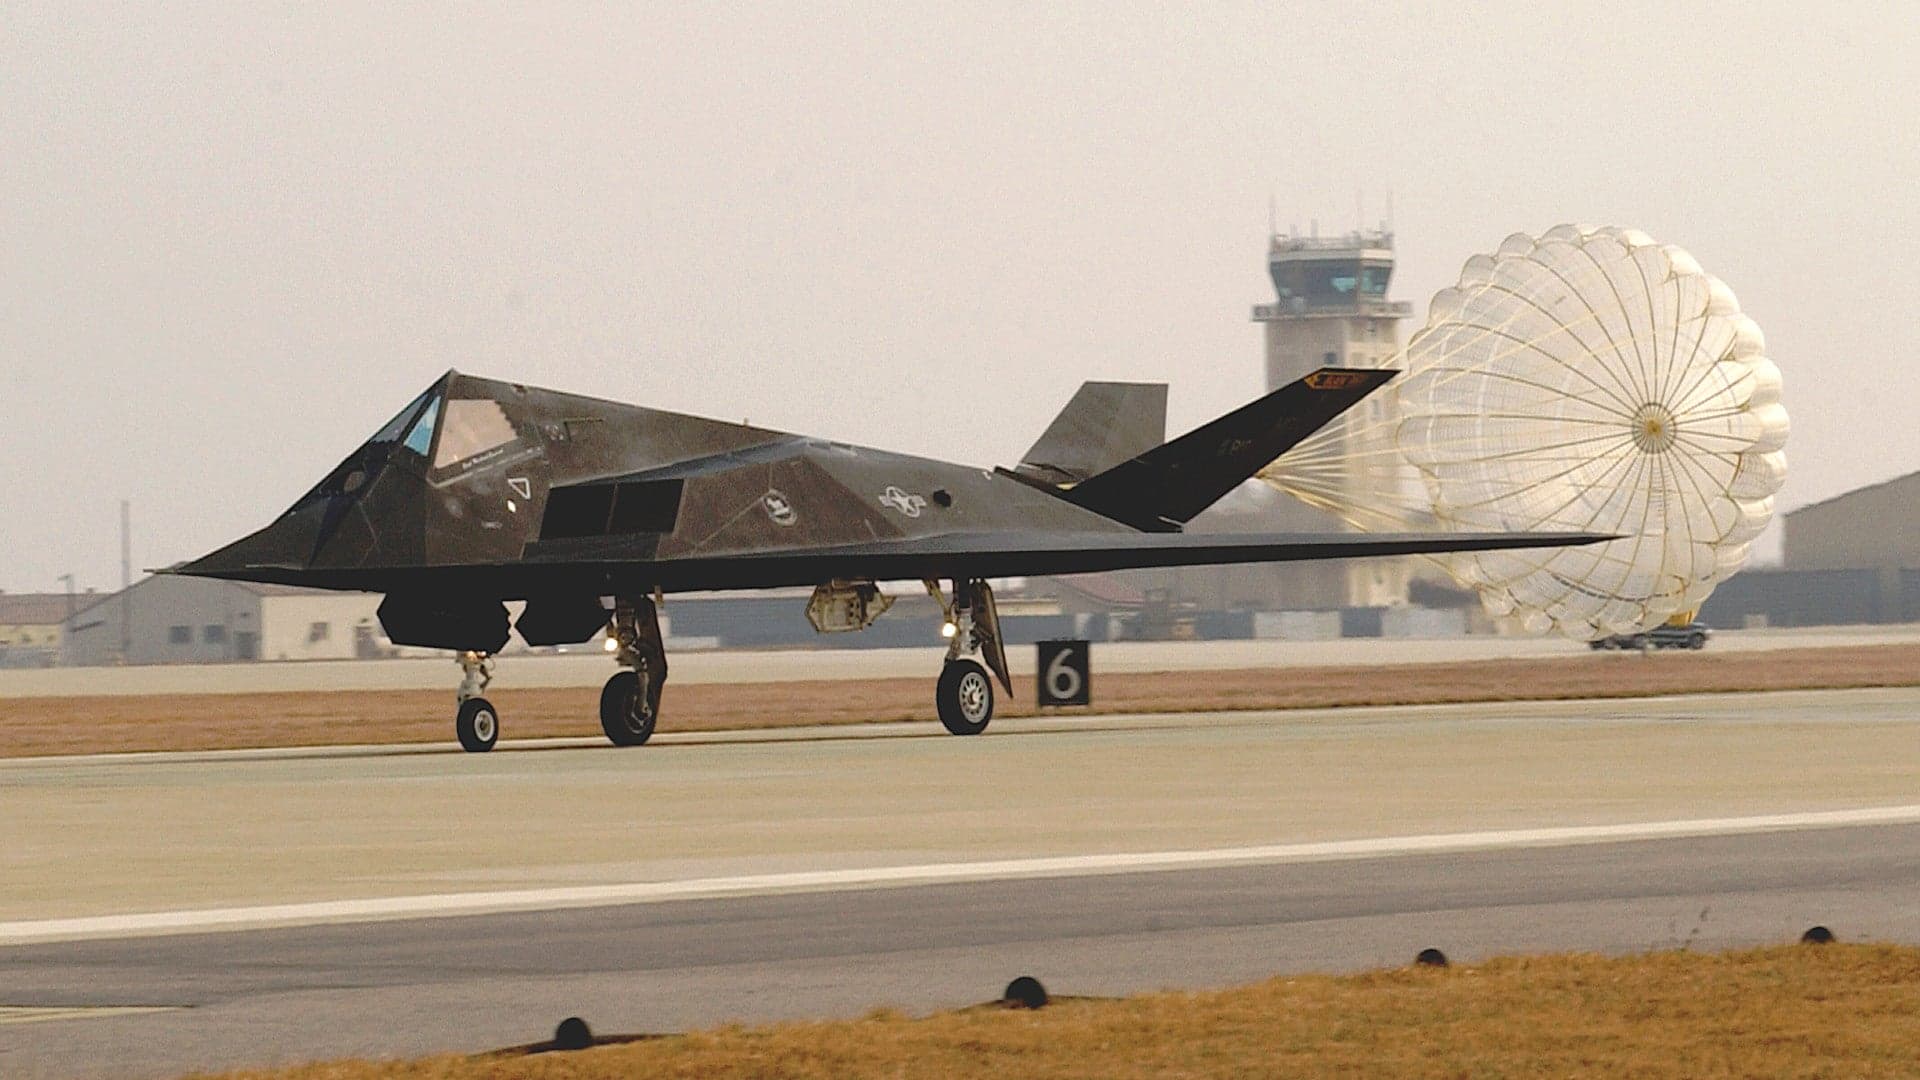 Here’s Who Has Been Flying The F-117 Stealth Jets And Why According To The Air Force